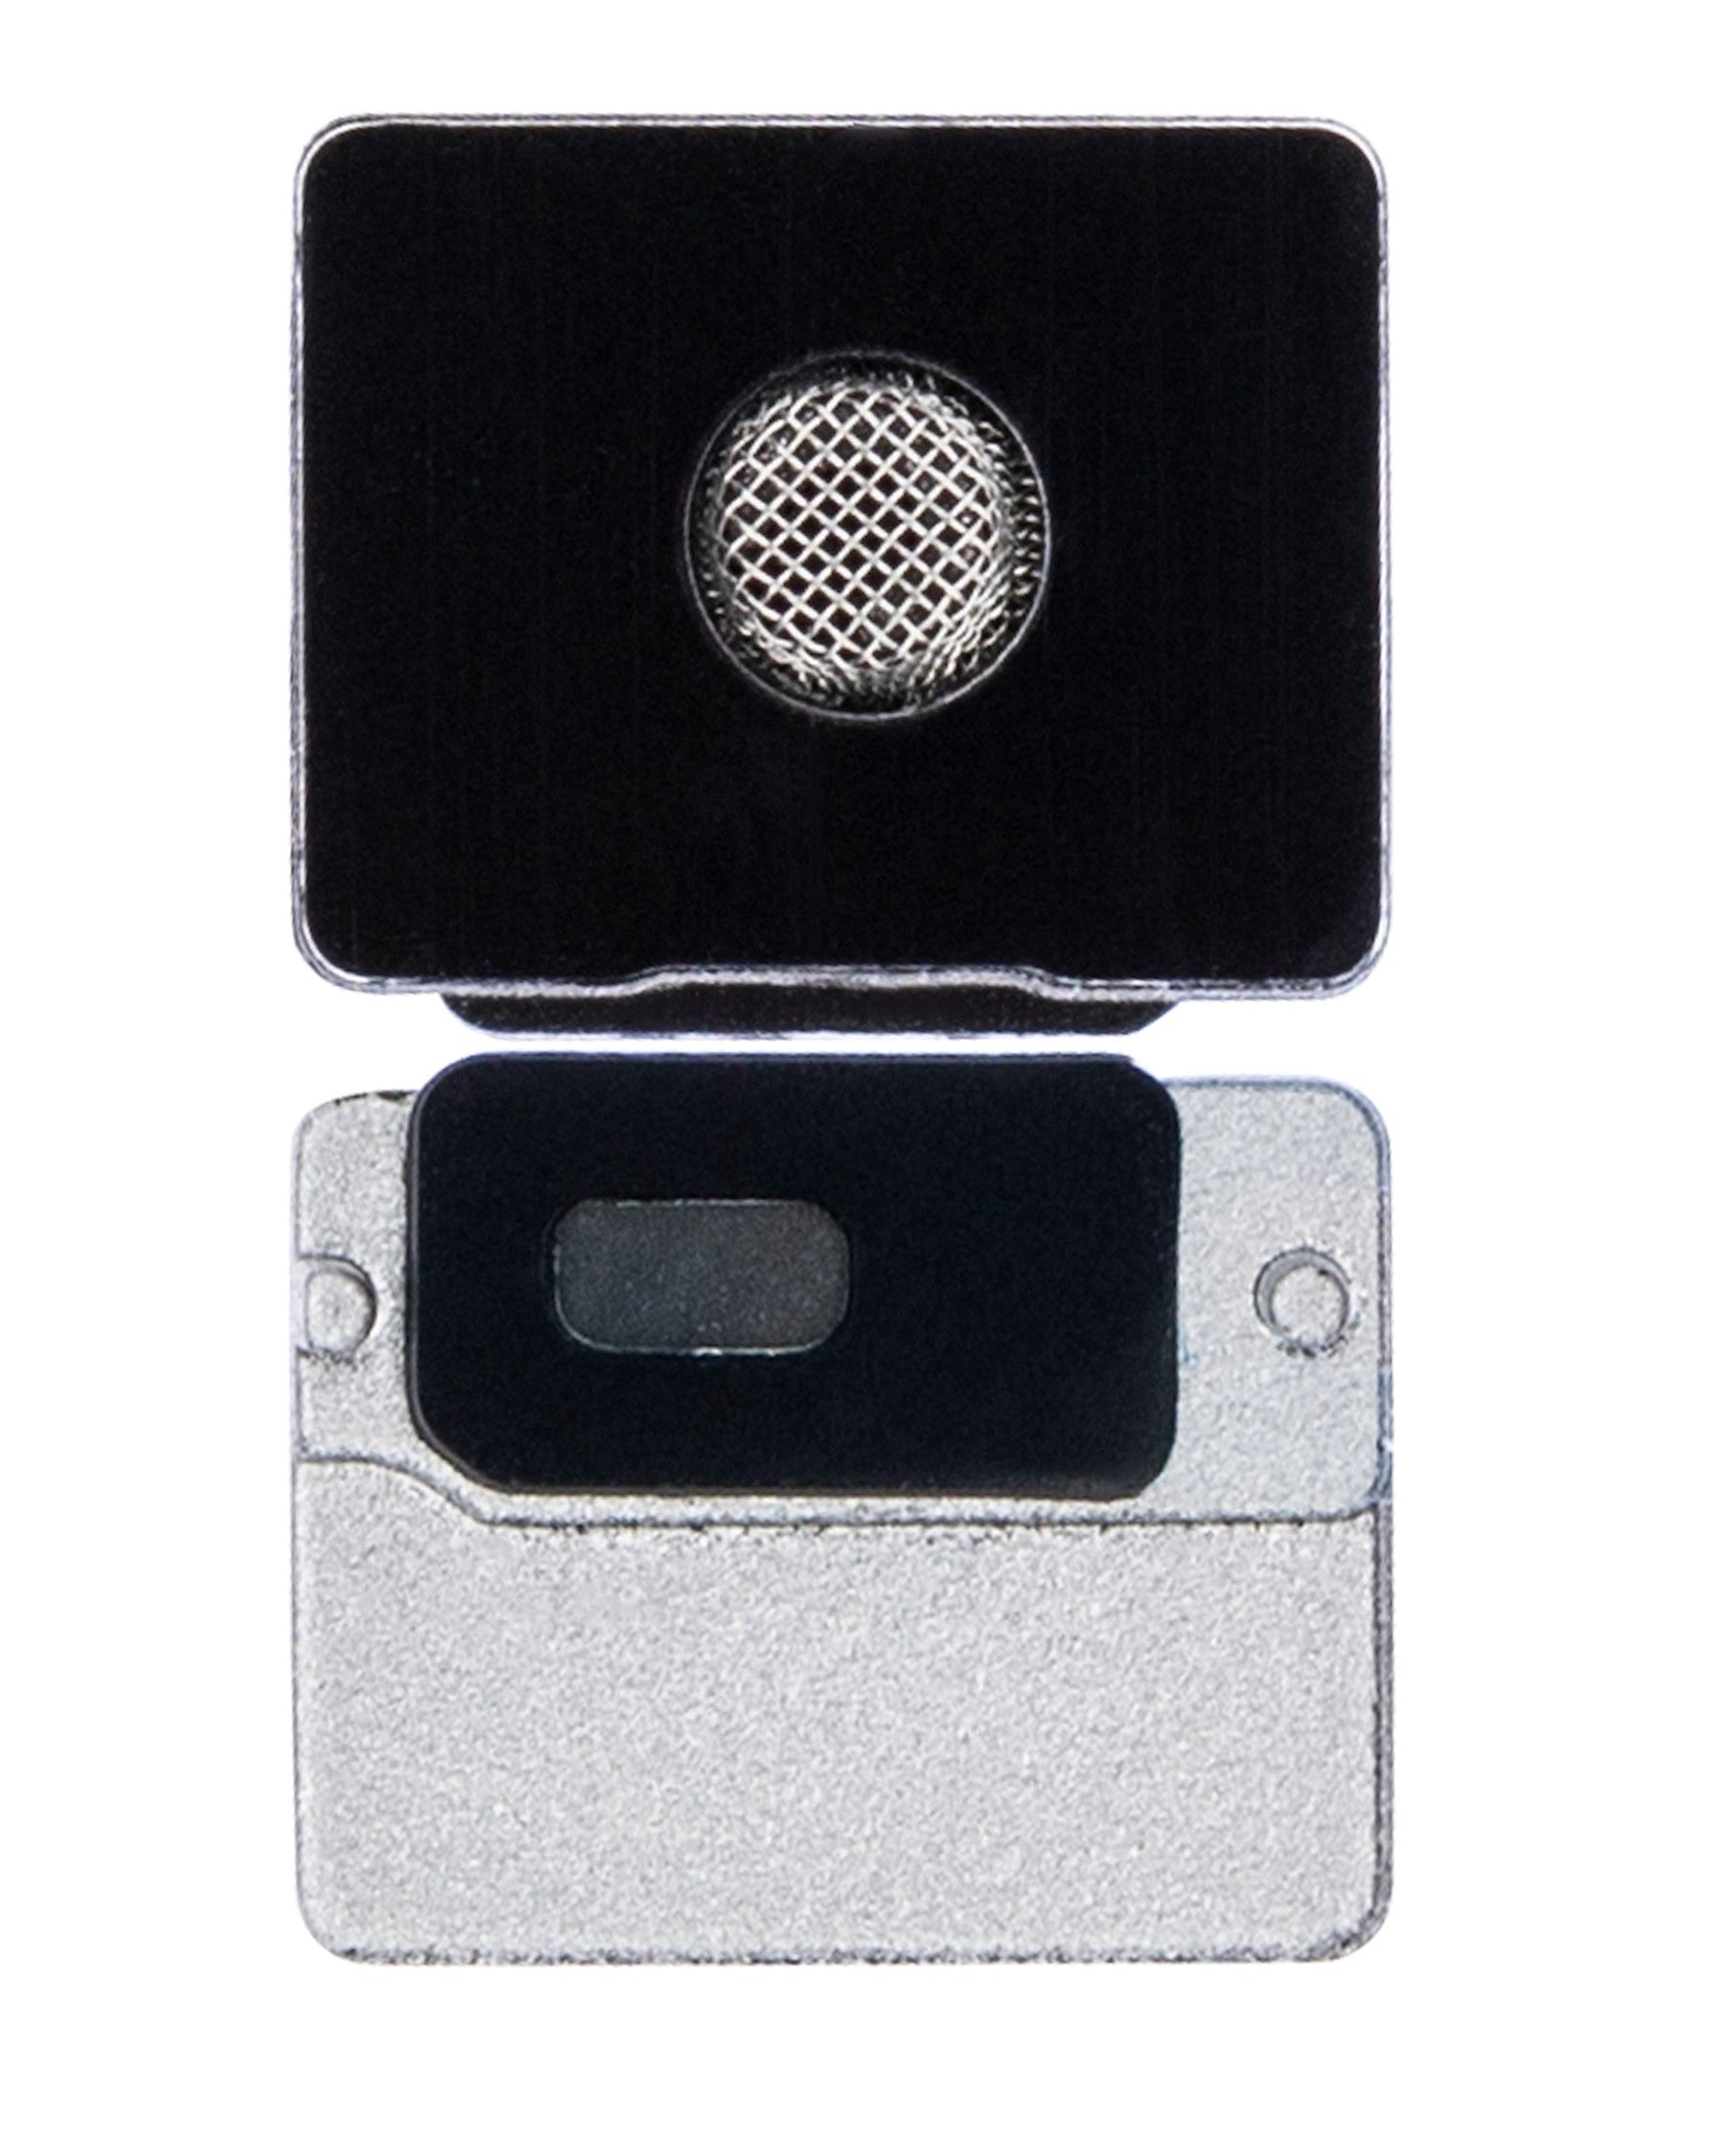 WHITE - FLASH LIGHT / POWER FLEX BRACKET WITH MICROPHONE MESH FOR IPHONE 11 (10 PACK)